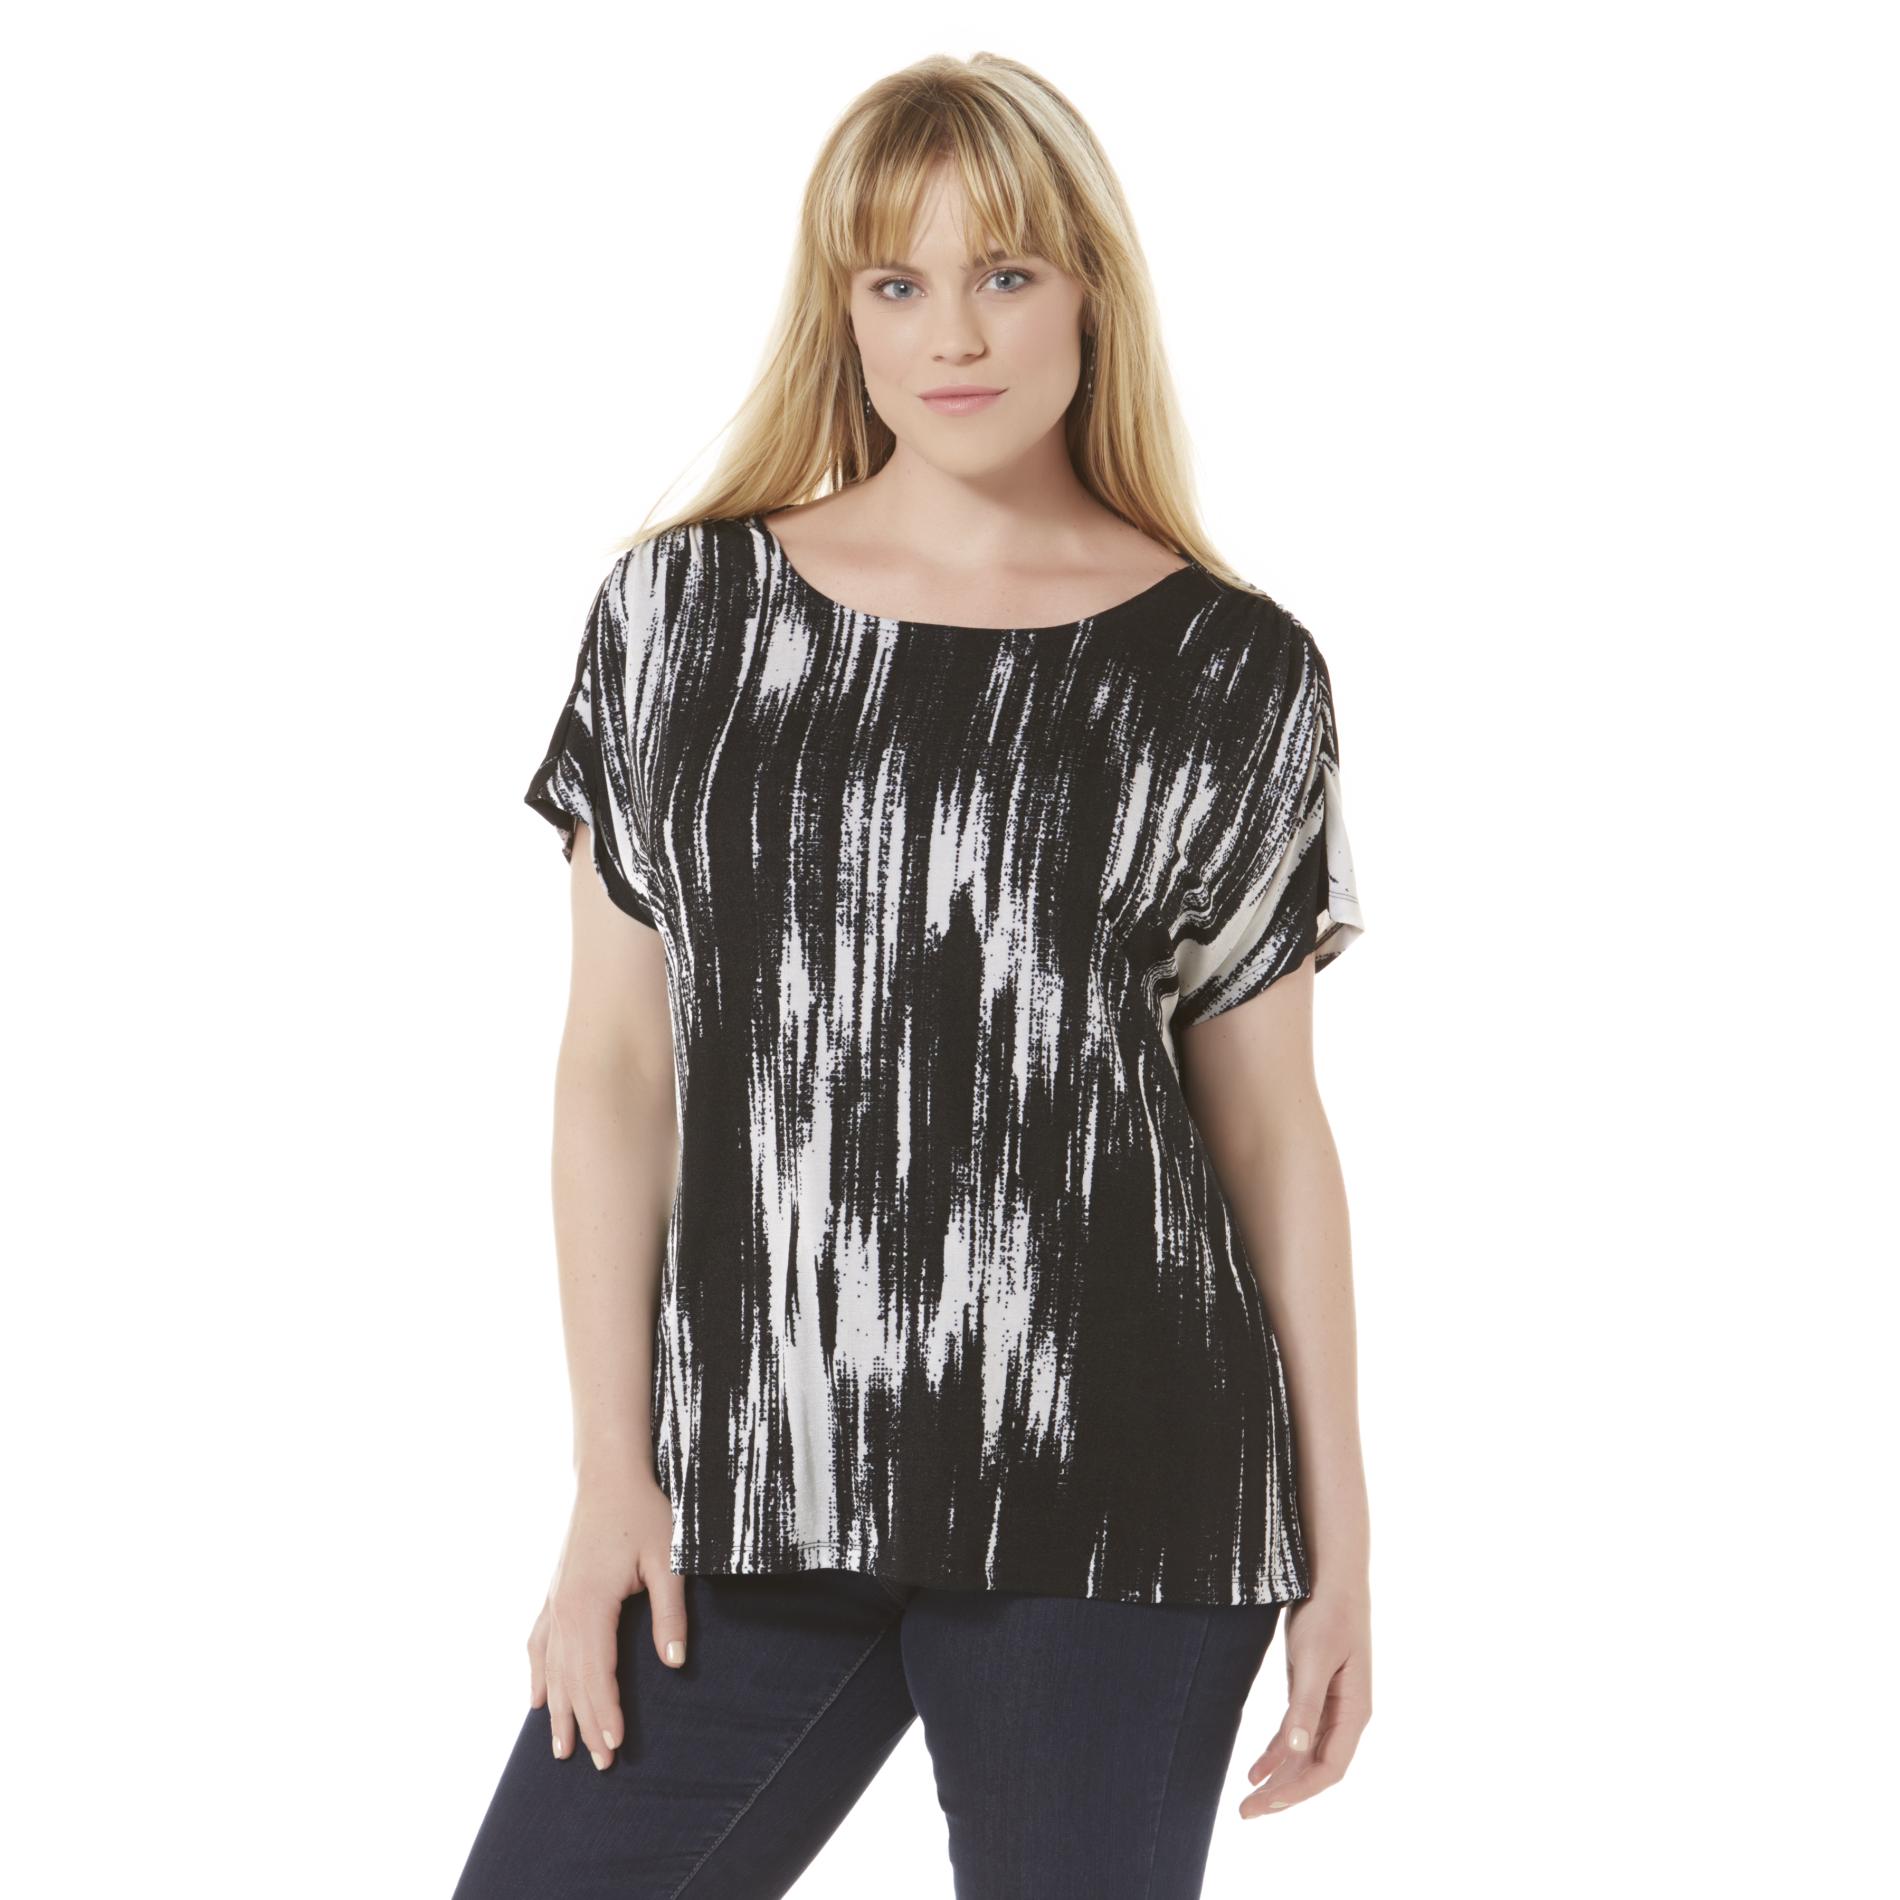 Women's Plus Slinky Knit Top - Abstract Print